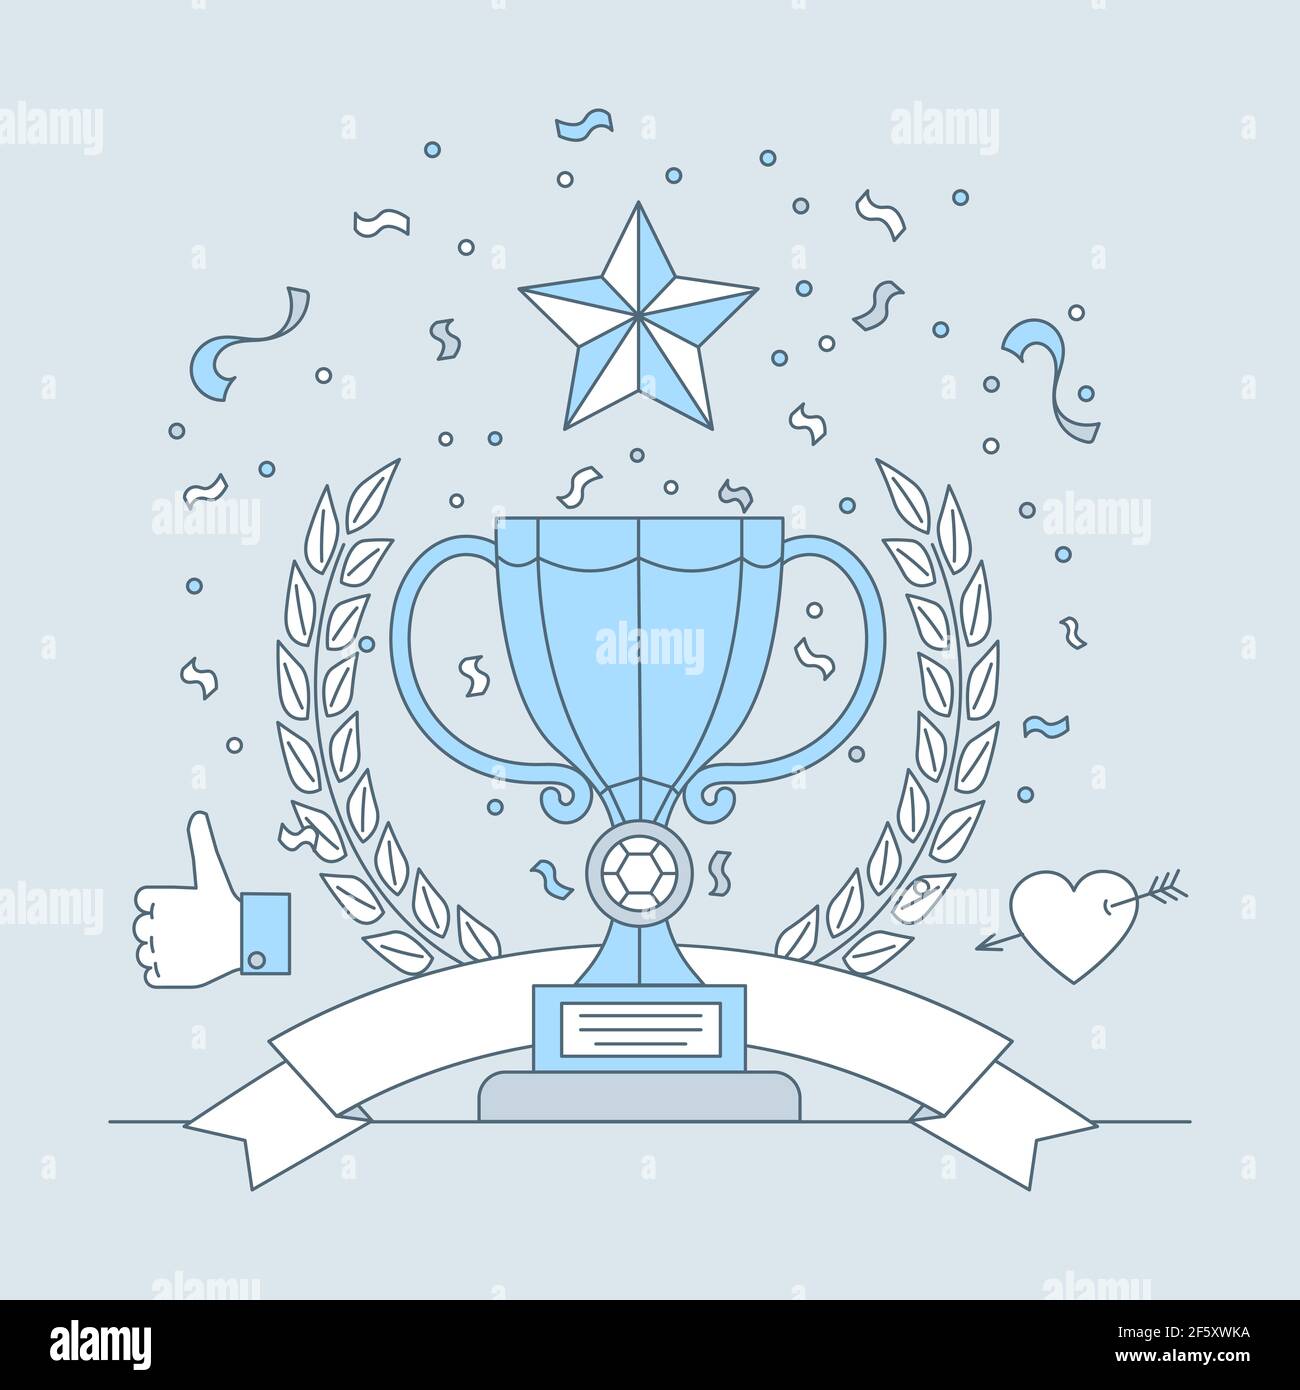 Best place trophy with star sign vector cartoon outline illustration. Cup on pedestal with laurel wreath and ribbon for winner in competition. Award for champion, prize for winner concept. Stock Vector